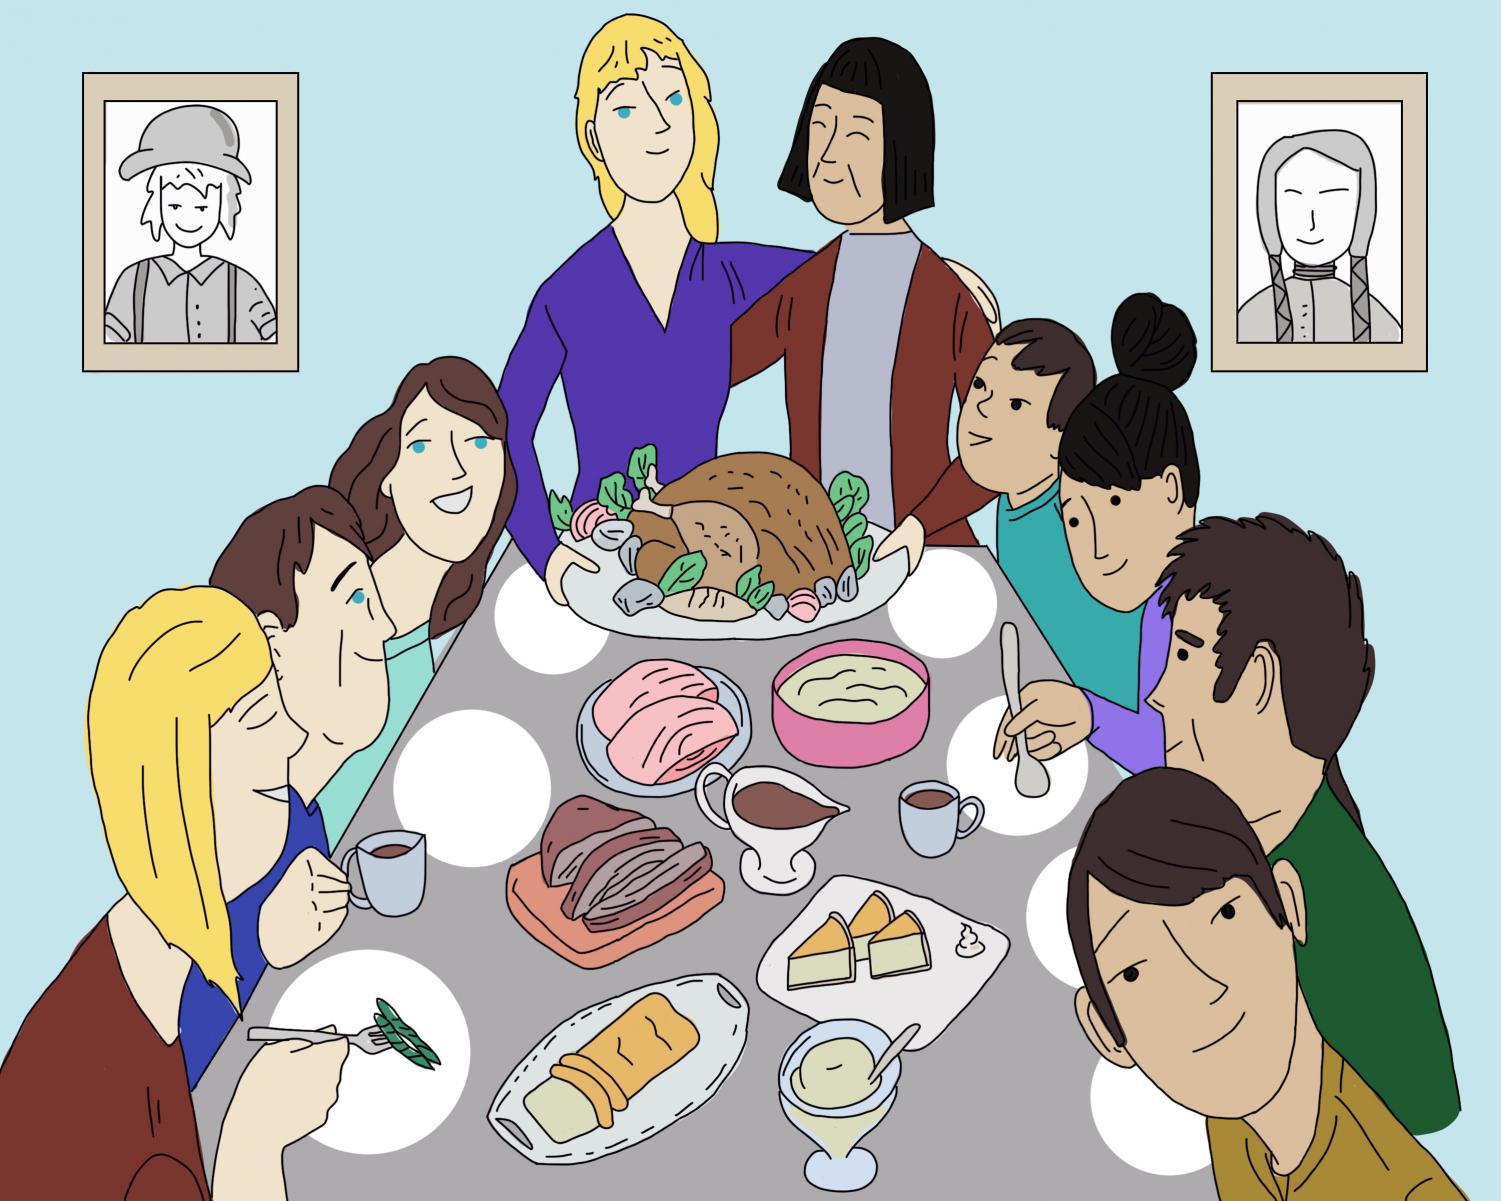 The Myths of the Thanksgiving Story and the Lasting Damage They Imbue, History